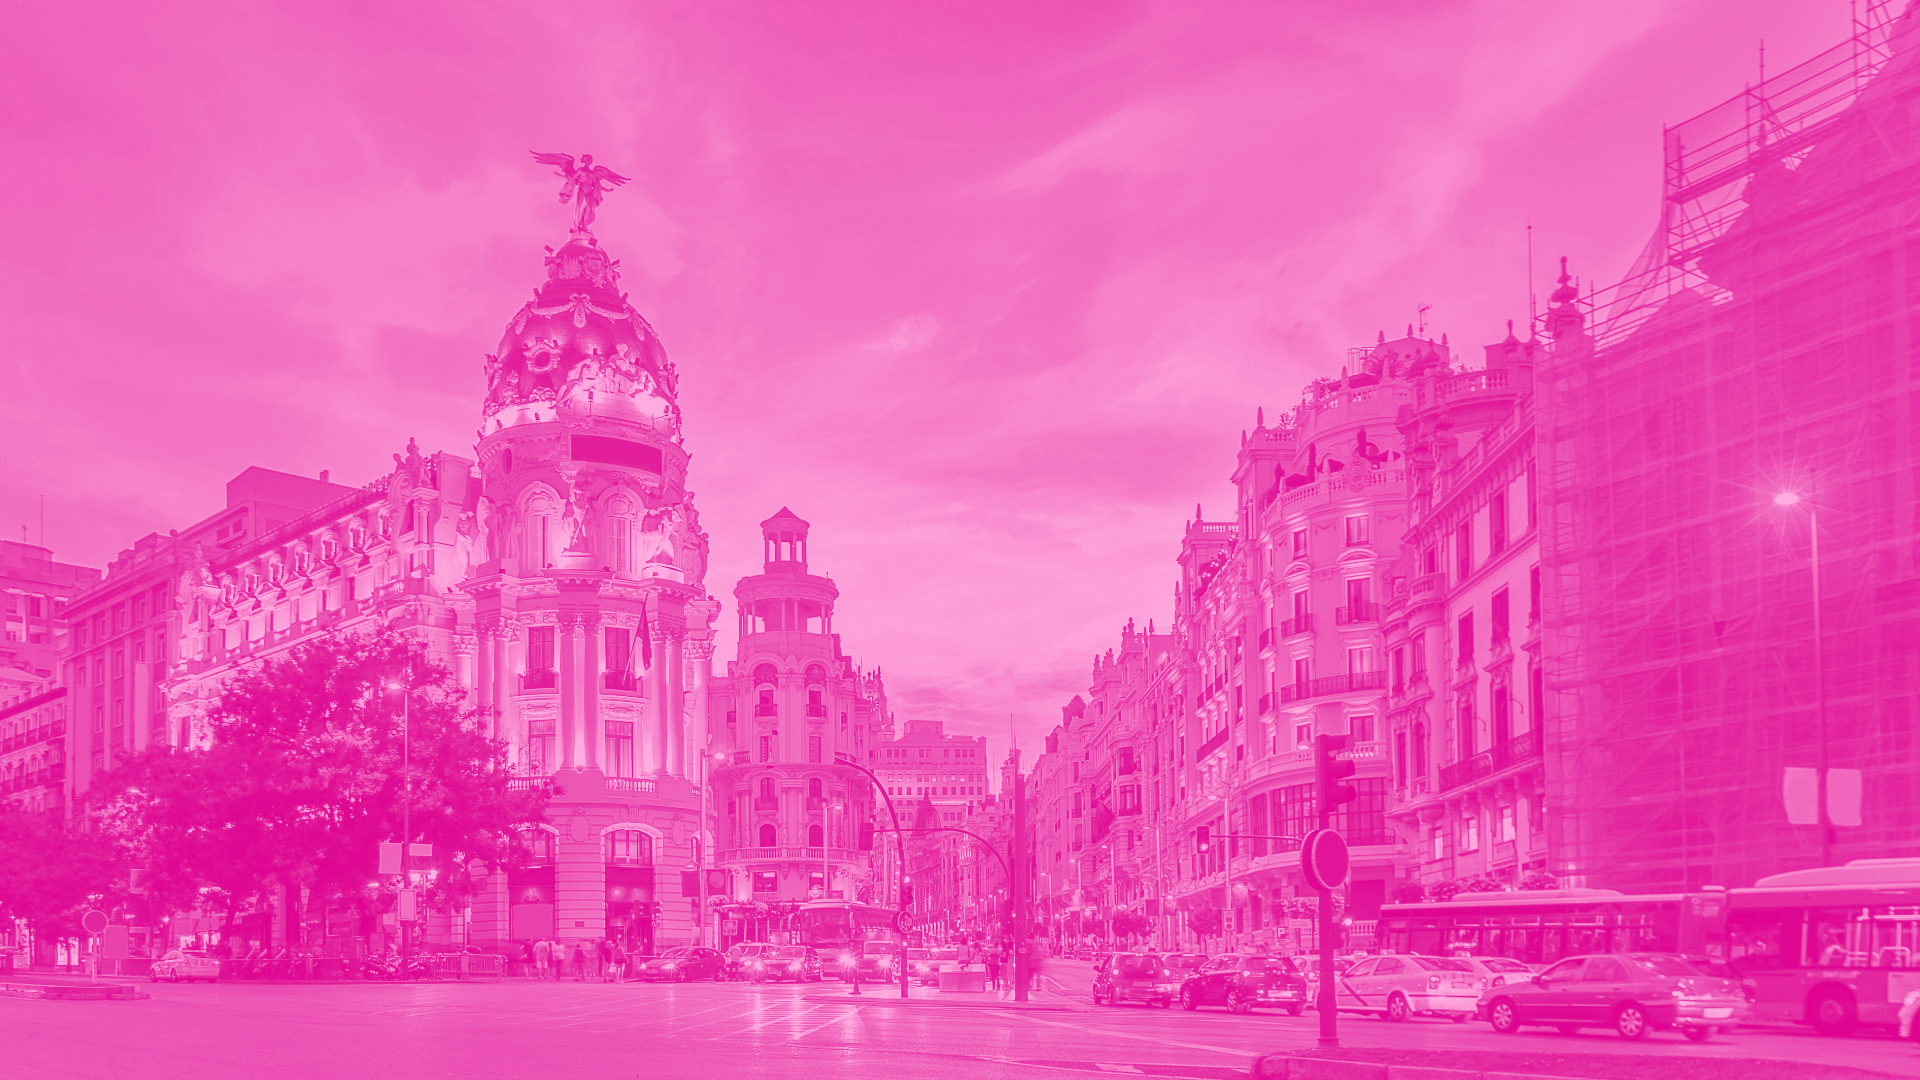 Top 5 Cities to Live in Spain as a Digital Nomad